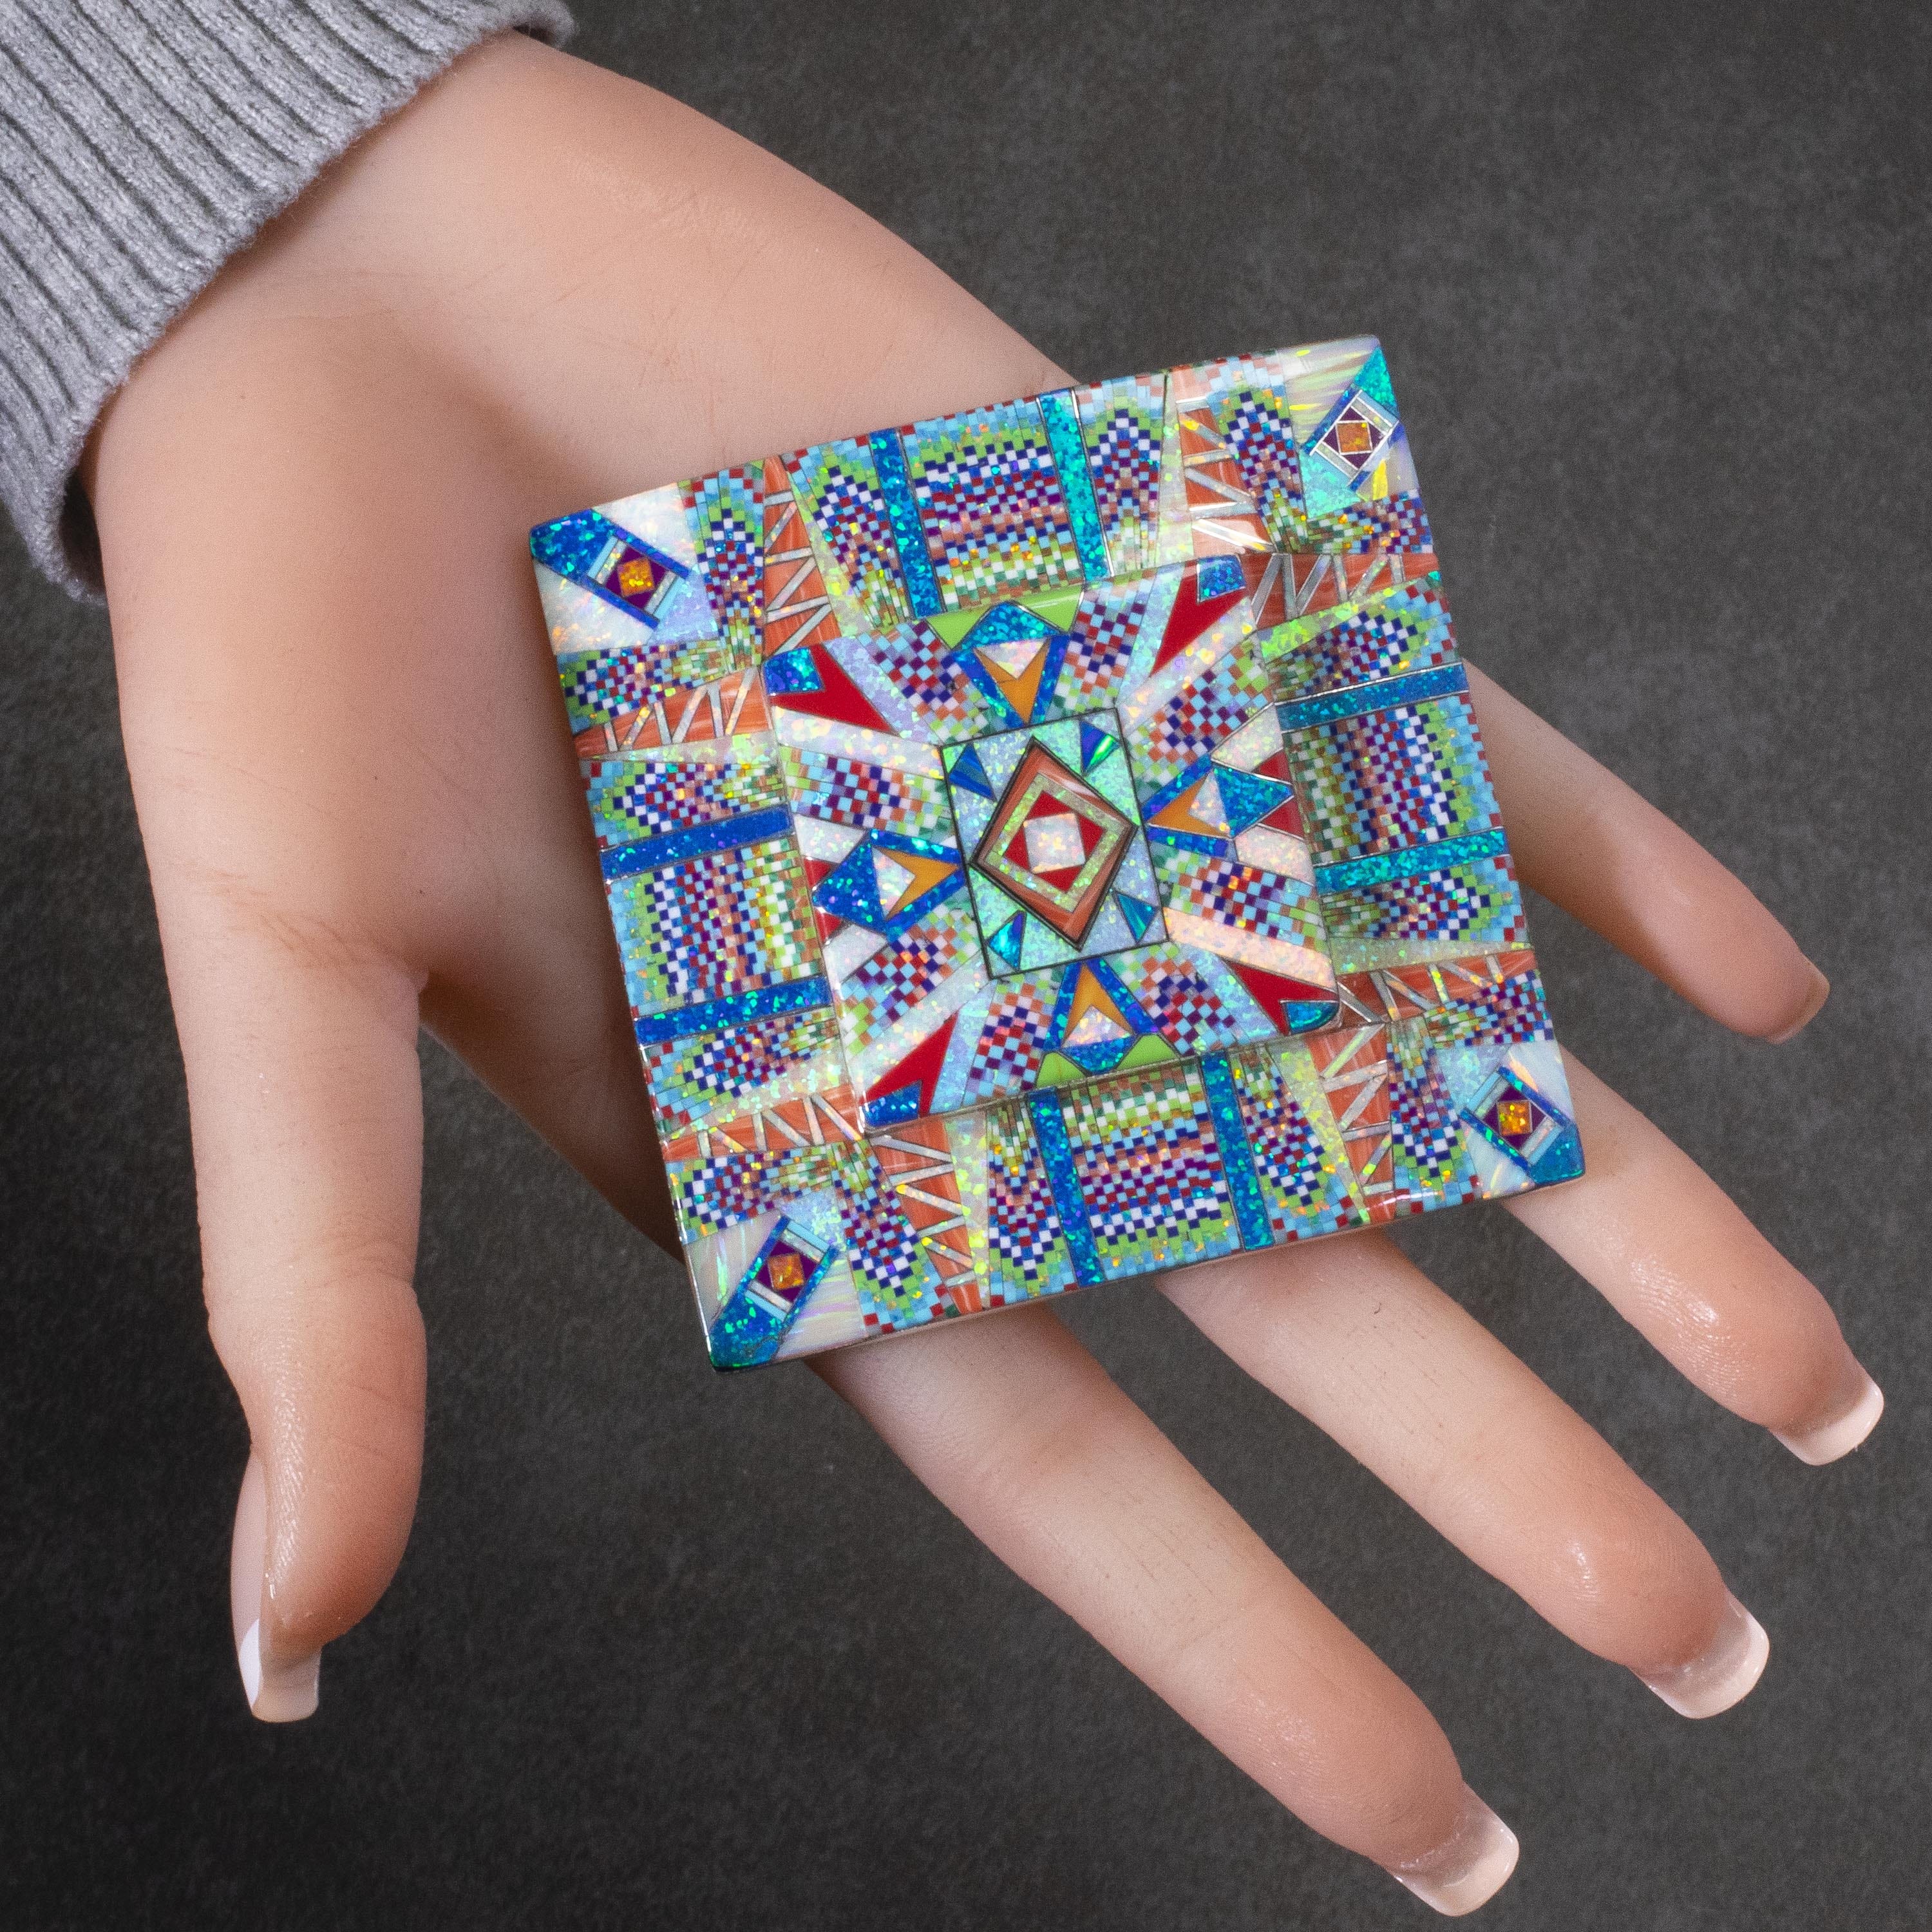 KALIFANO Southwest Silver Jewelry Multi Gem Opal Micro Inlay with Genuine Turquoise and Coral Handmade 925 Sterling Silver Square Belt Buckle AKBB1800.001